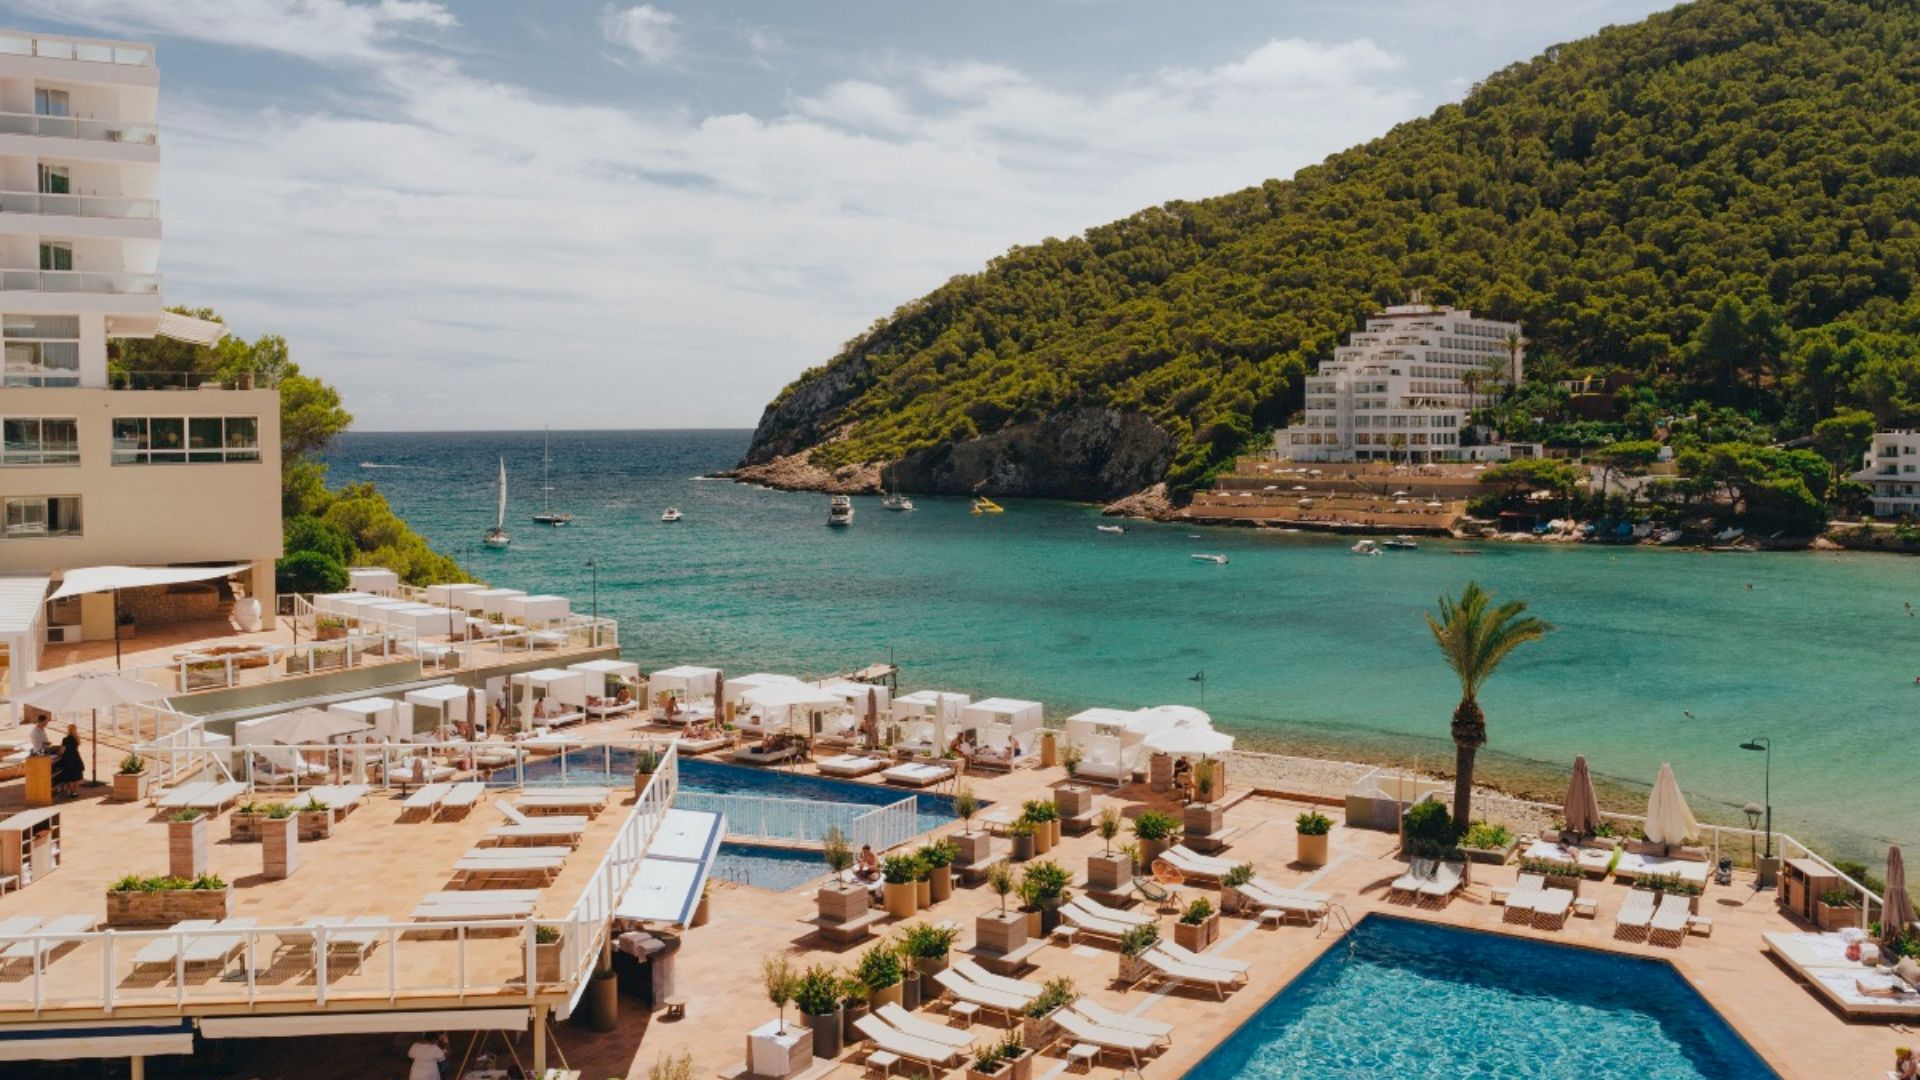 Ibiza locals protest the effects of over-tourism in the region